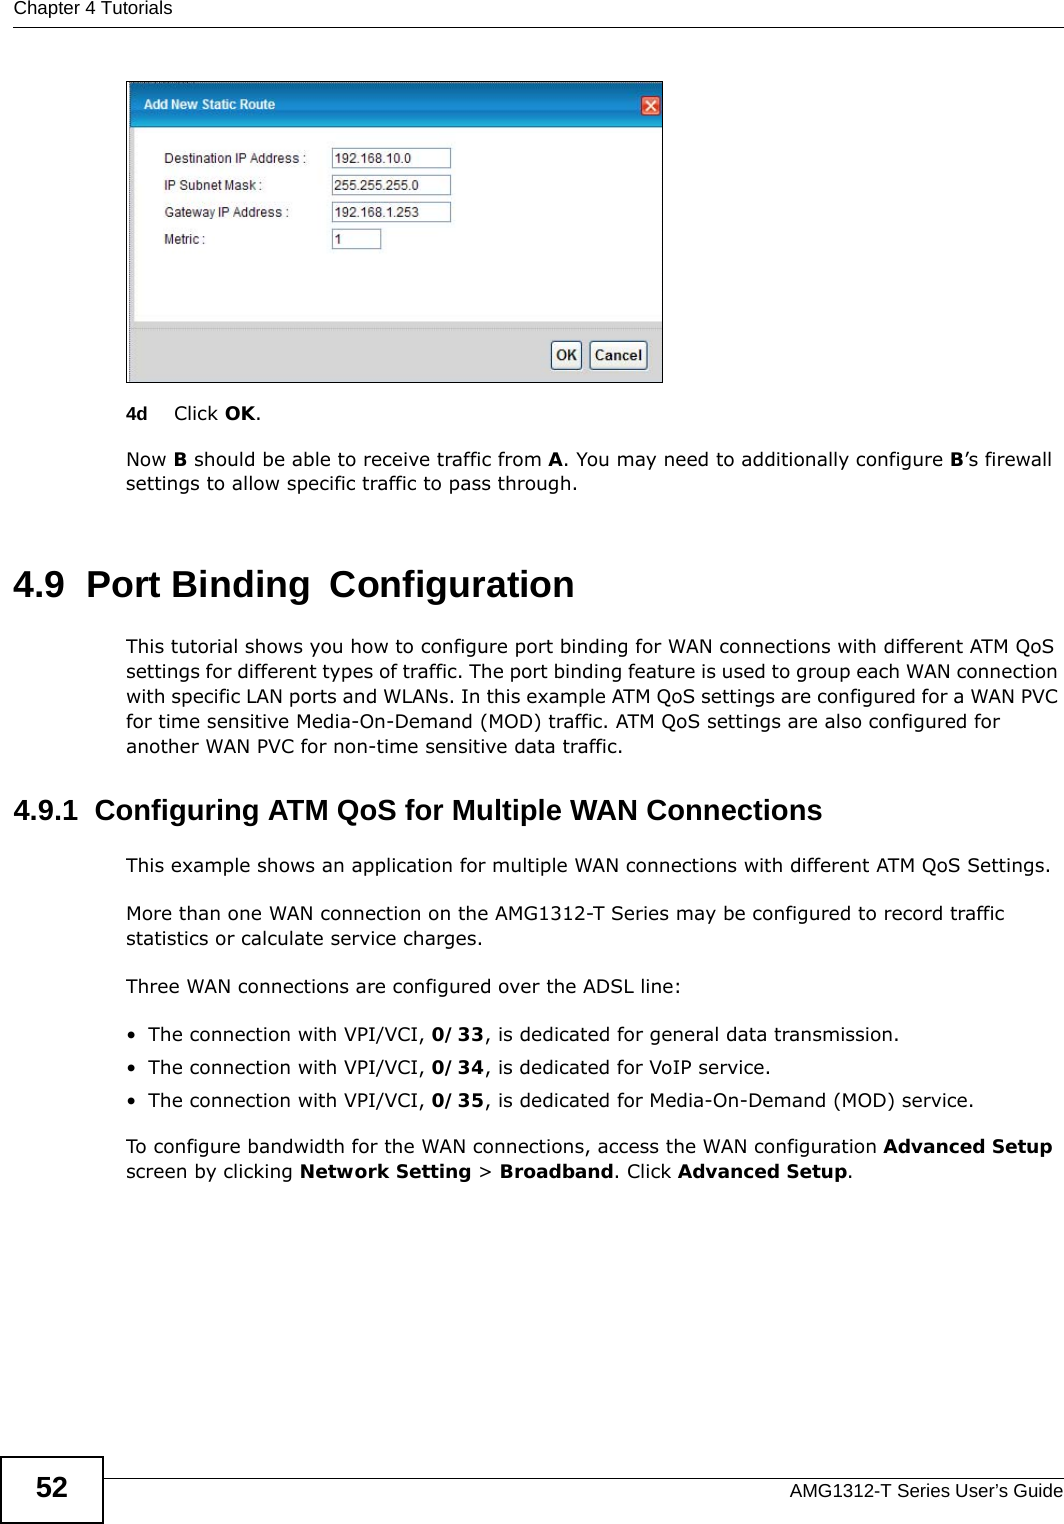 Chapter 4 TutorialsAMG1312-T Series User’s Guide524d Click OK.Now B should be able to receive traffic from A. You may need to additionally configure B’s firewall settings to allow specific traffic to pass through. 4.9  Port Binding ConfigurationThis tutorial shows you how to configure port binding for WAN connections with different ATM QoS settings for different types of traffic. The port binding feature is used to group each WAN connection with specific LAN ports and WLANs. In this example ATM QoS settings are configured for a WAN PVC for time sensitive Media-On-Demand (MOD) traffic. ATM QoS settings are also configured for another WAN PVC for non-time sensitive data traffic. 4.9.1  Configuring ATM QoS for Multiple WAN ConnectionsThis example shows an application for multiple WAN connections with different ATM QoS Settings.More than one WAN connection on the AMG1312-T Series may be configured to record traffic statistics or calculate service charges.Three WAN connections are configured over the ADSL line:• The connection with VPI/VCI, 0/33, is dedicated for general data transmission.• The connection with VPI/VCI, 0/34, is dedicated for VoIP service.• The connection with VPI/VCI, 0/35, is dedicated for Media-On-Demand (MOD) service.To configure bandwidth for the WAN connections, access the WAN configuration Advanced Setup screen by clicking Network Setting &gt; Broadband. Click Advanced Setup.